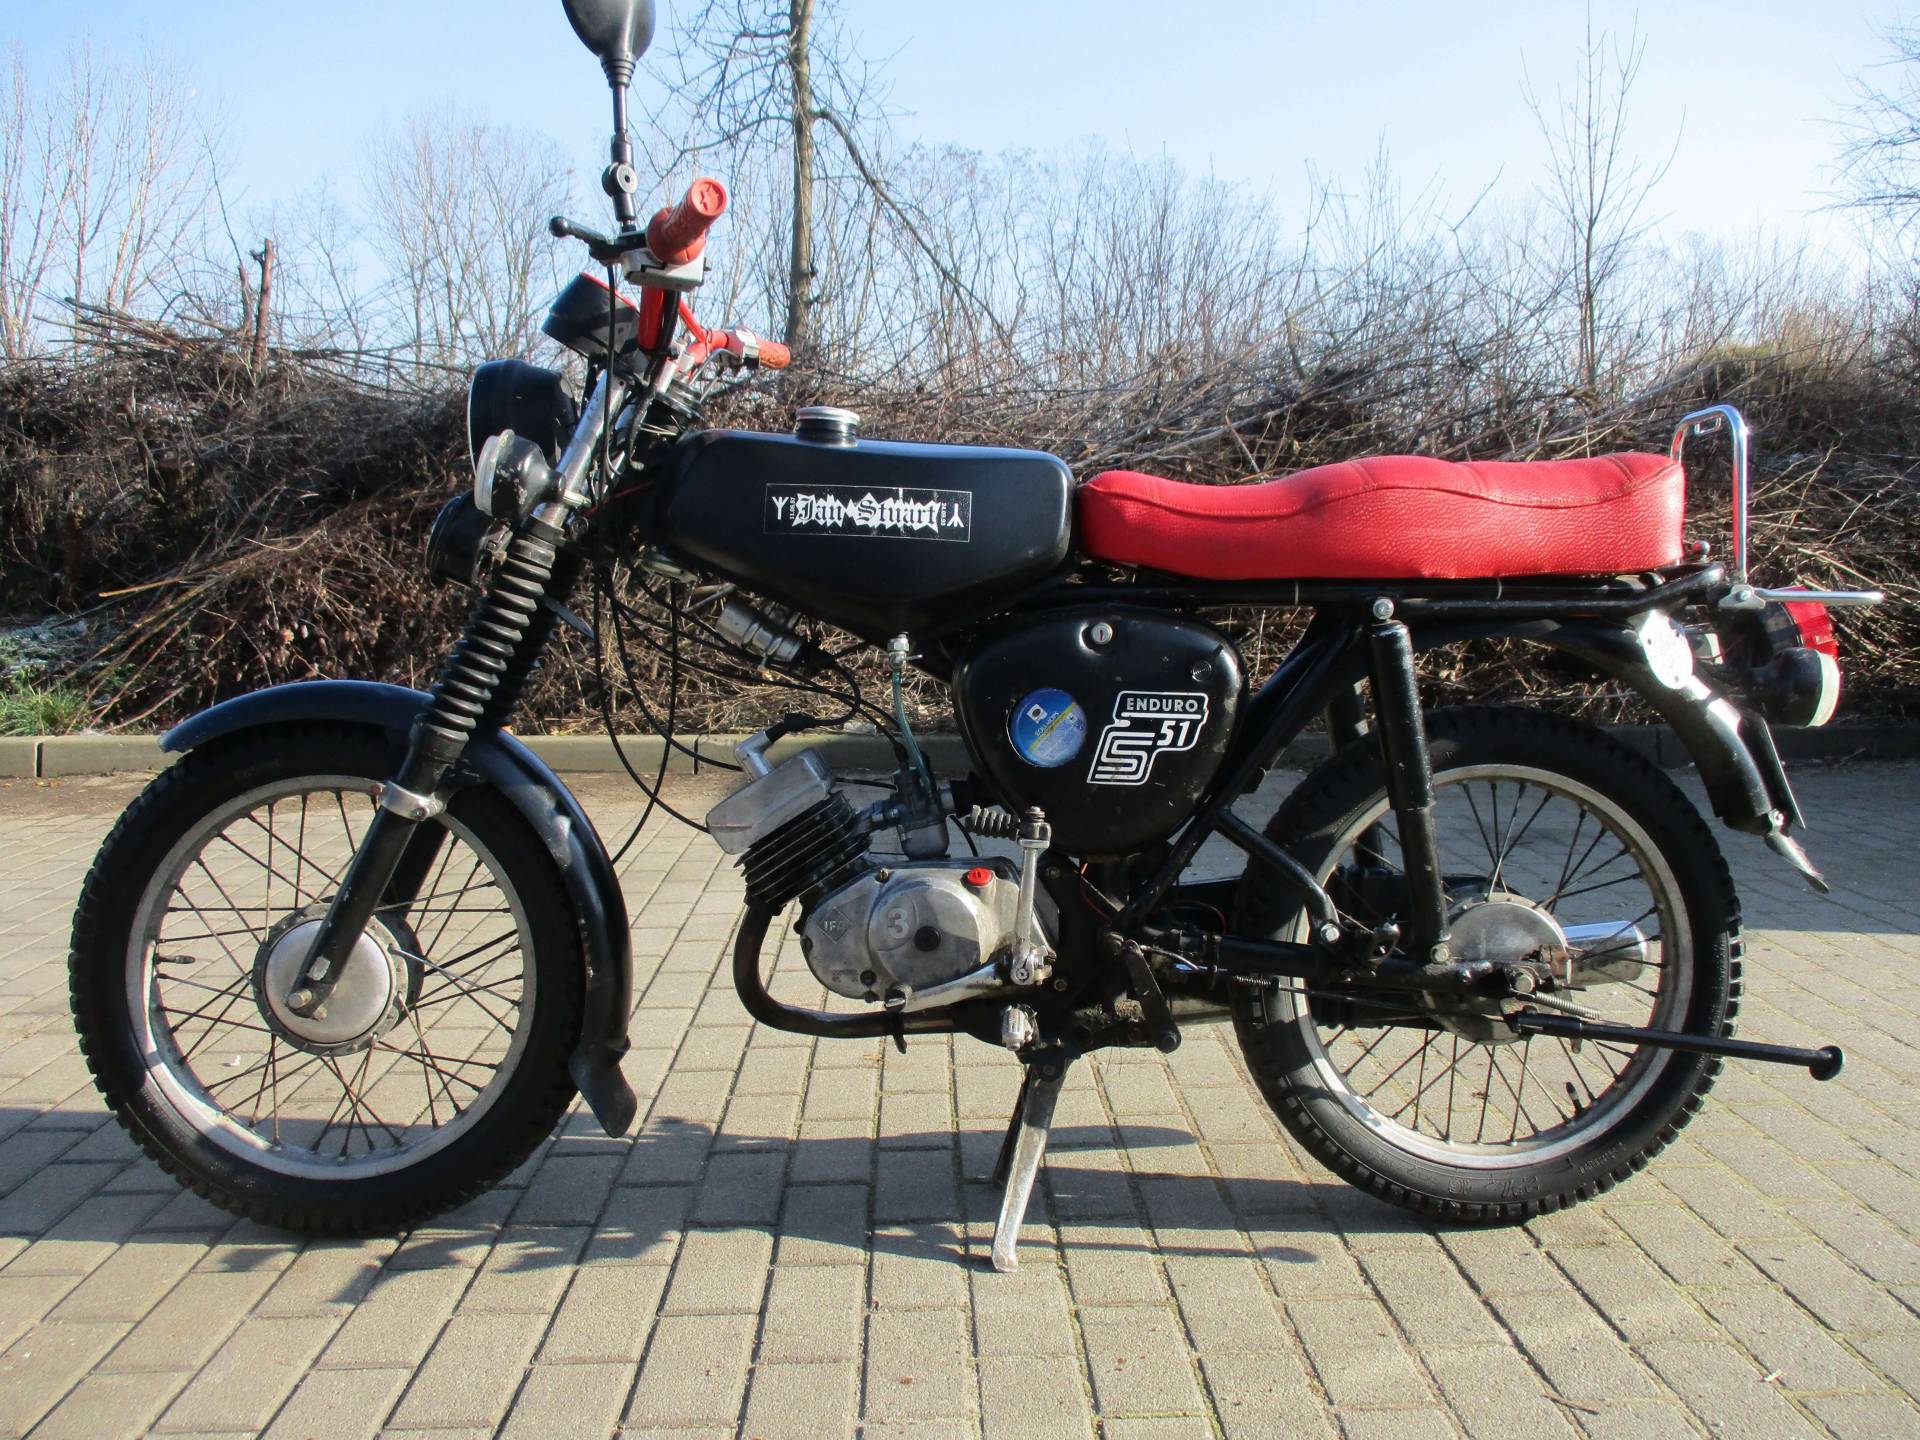 For Sale: Simson S51 B2-4 (1981) offered for €2,600